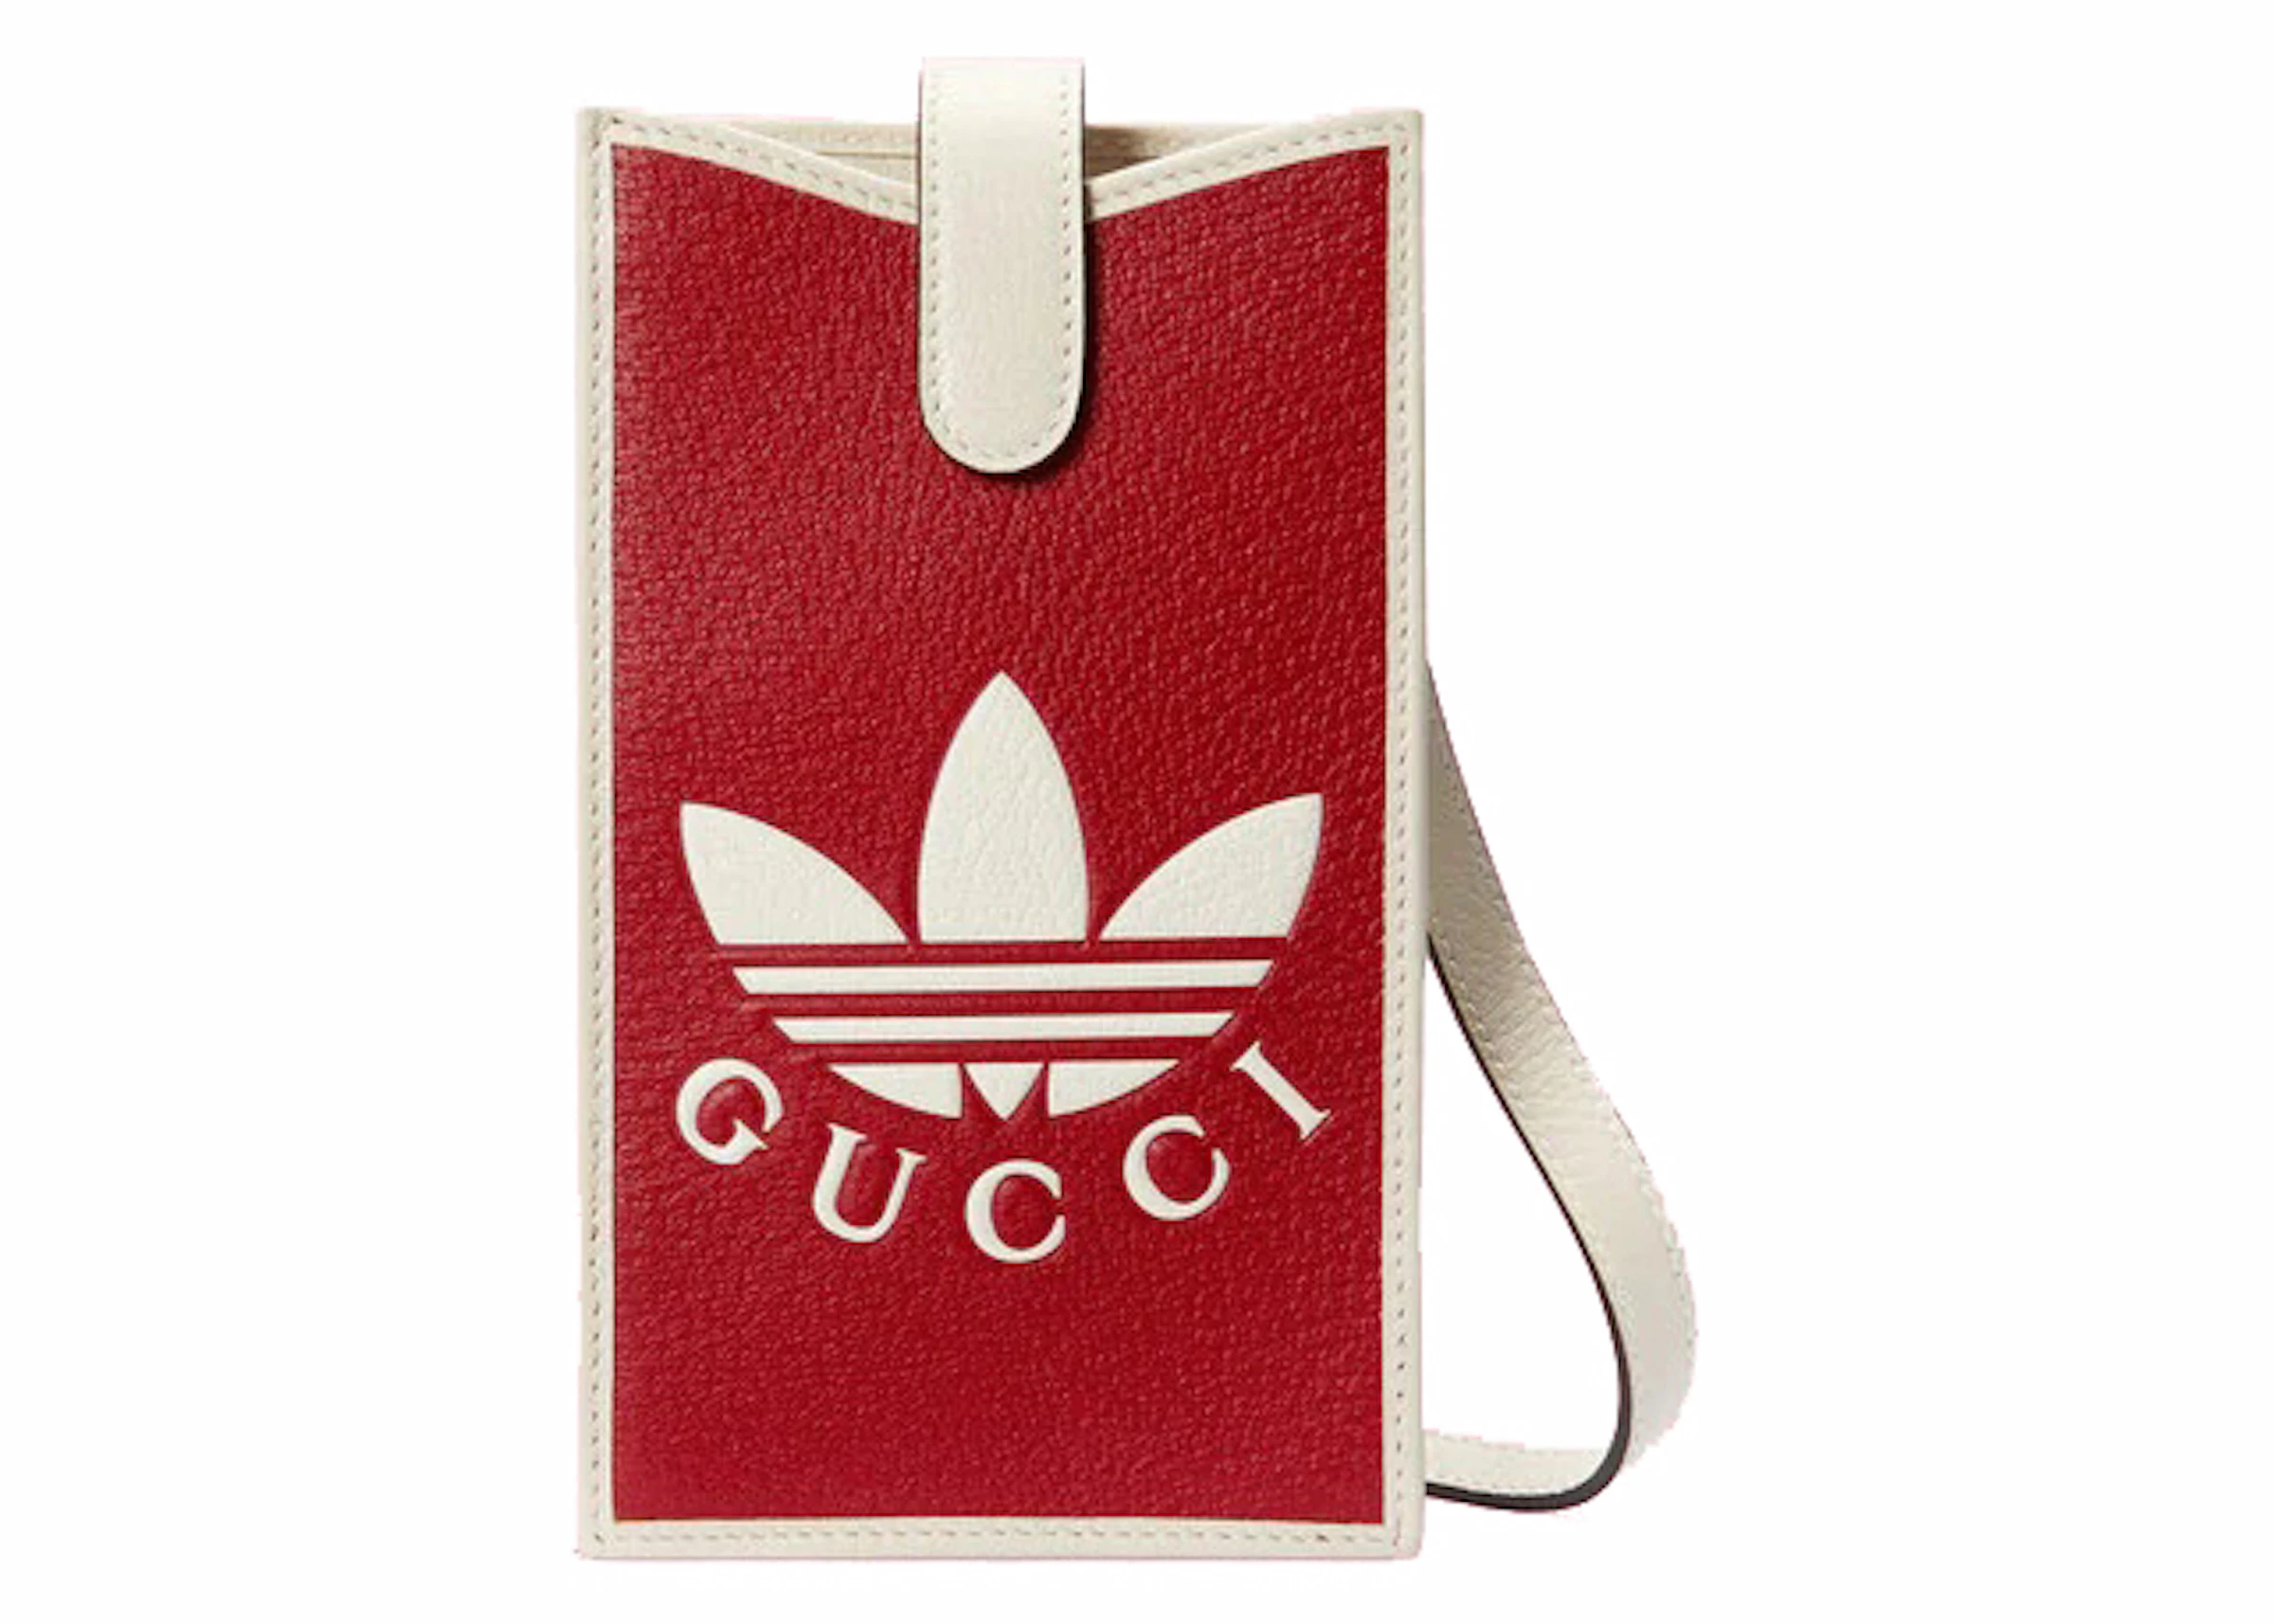 Regan Ruimteschip De Kamer Gucci x adidas Phone Case Red/White in Leather with Gold-tone - US